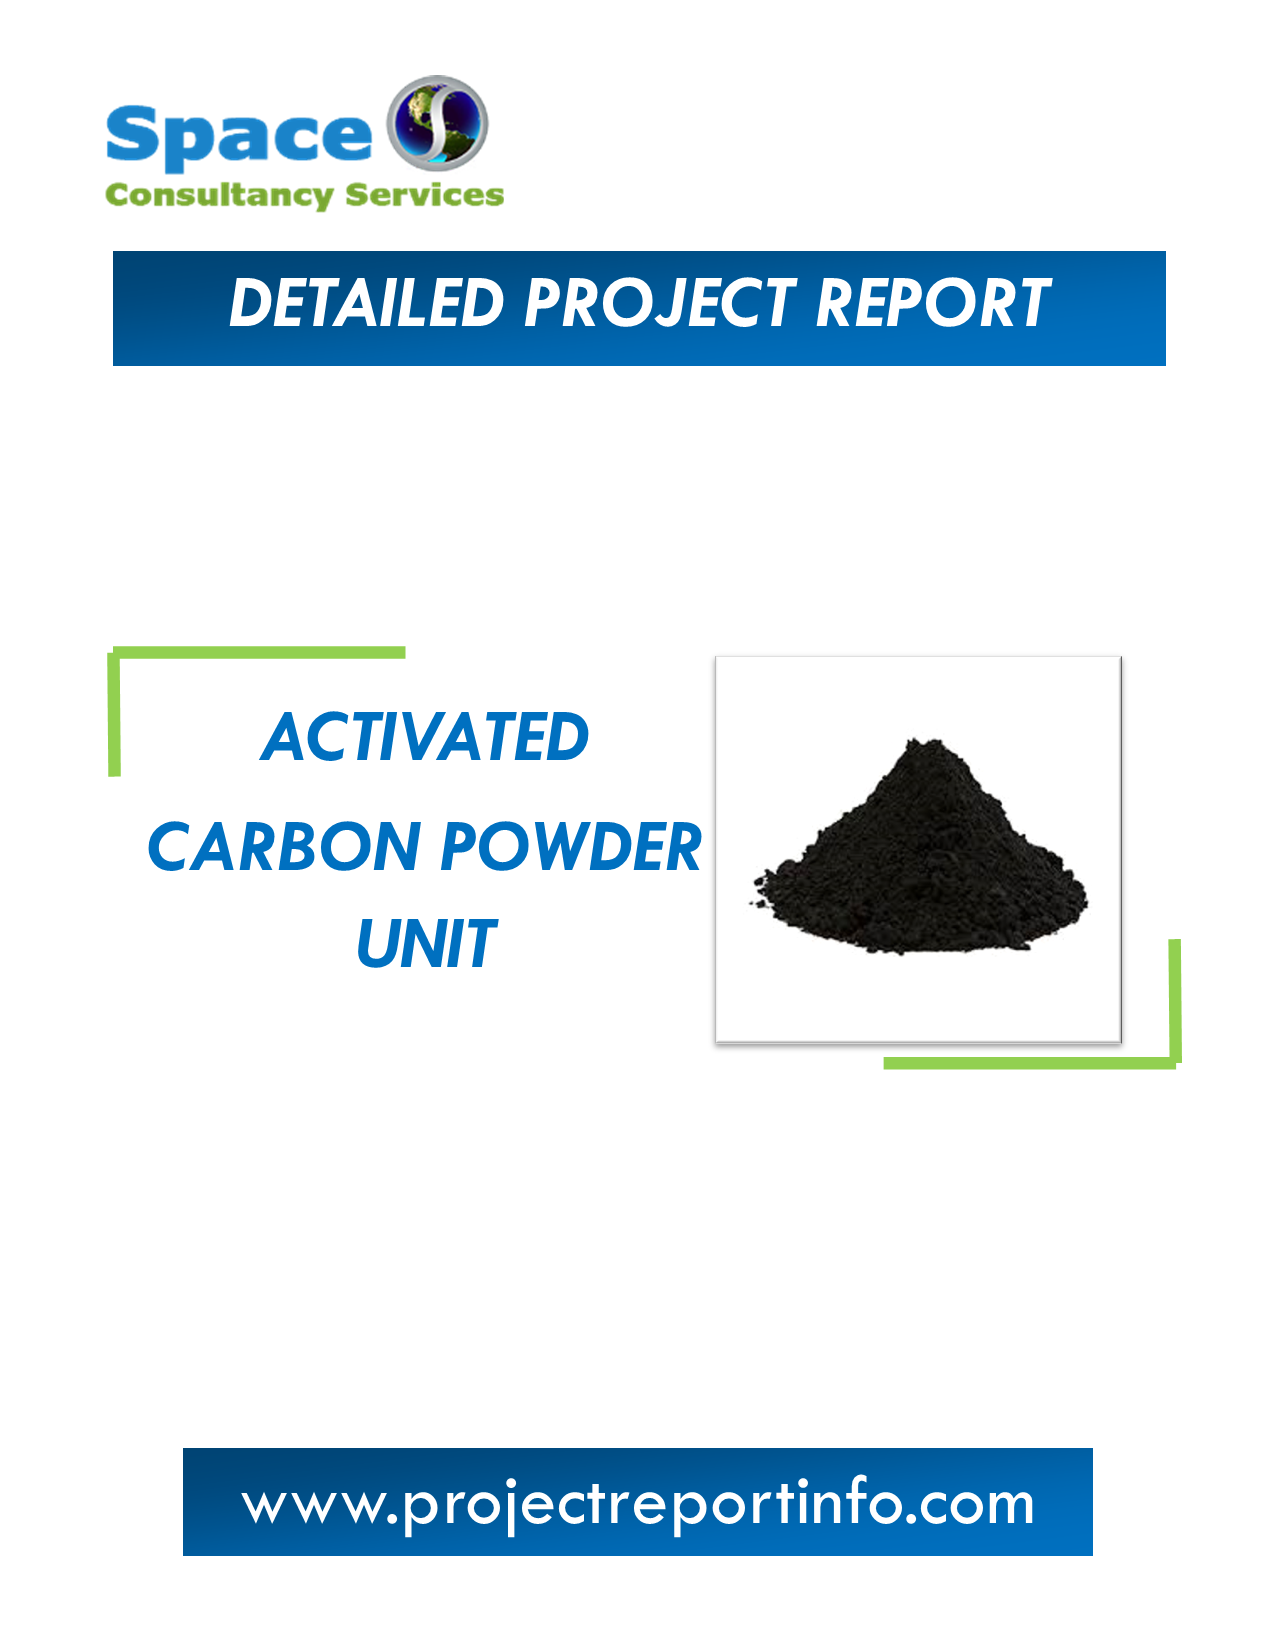 Project Report on Activated Carbon Powder Unit